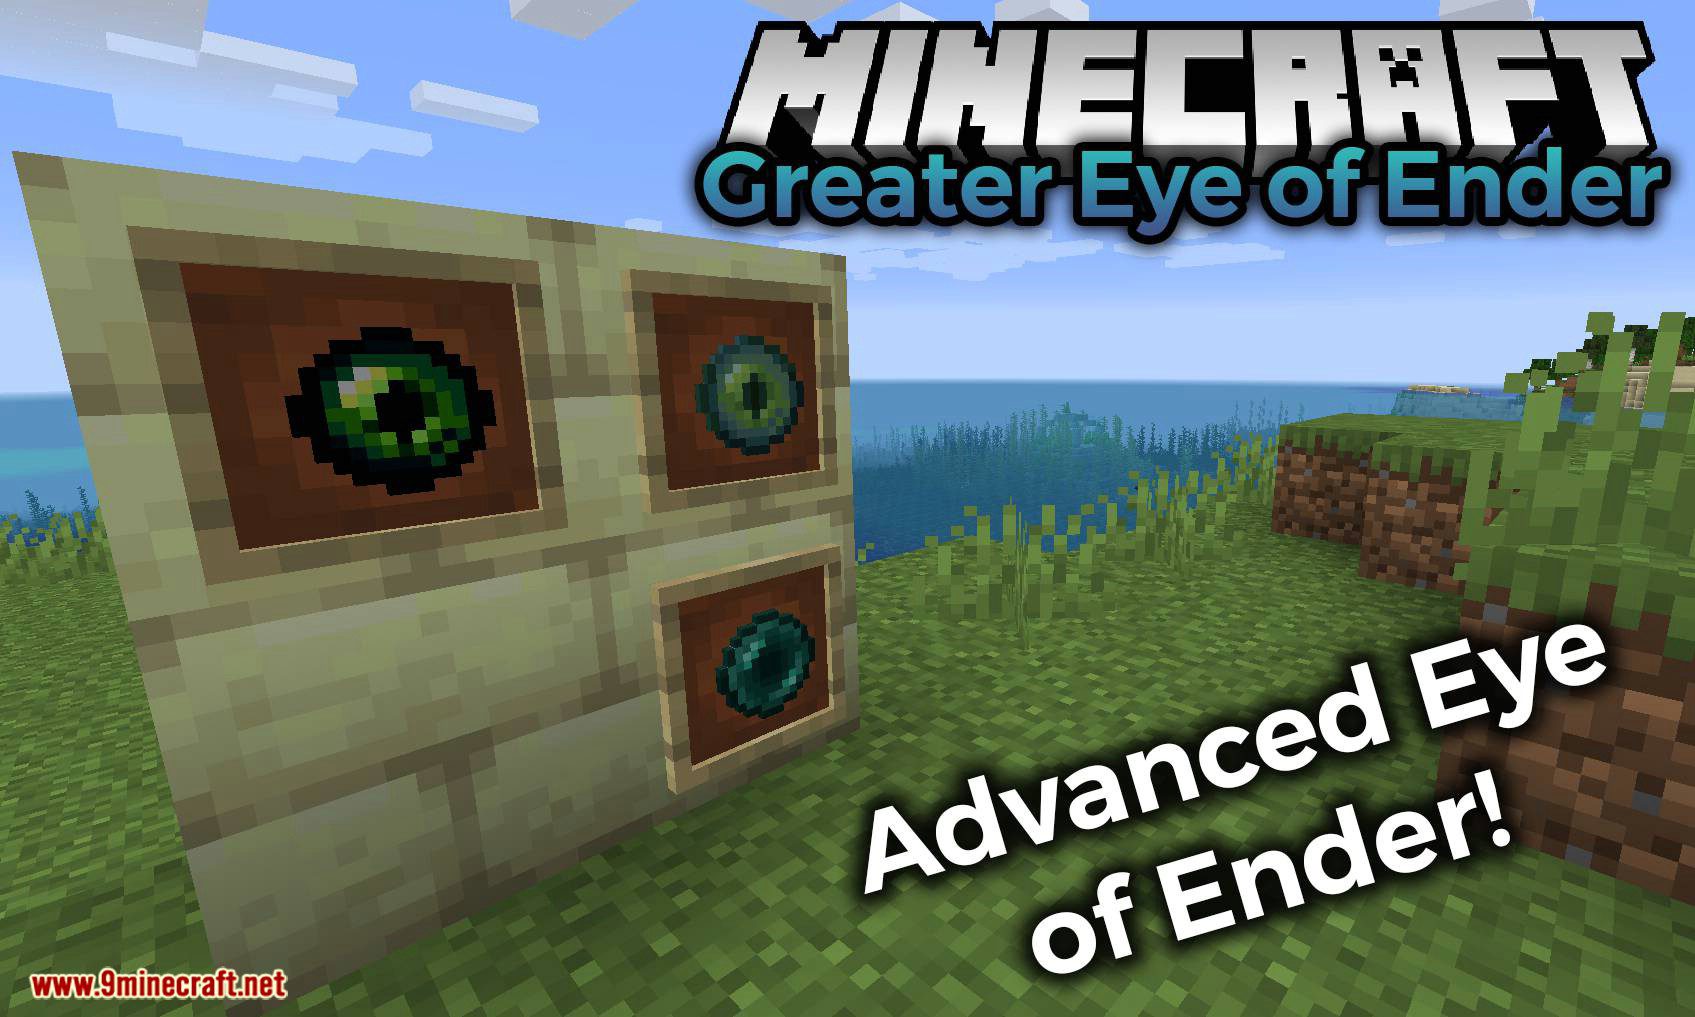 Top 3 uses for eyes of ender in Minecraft